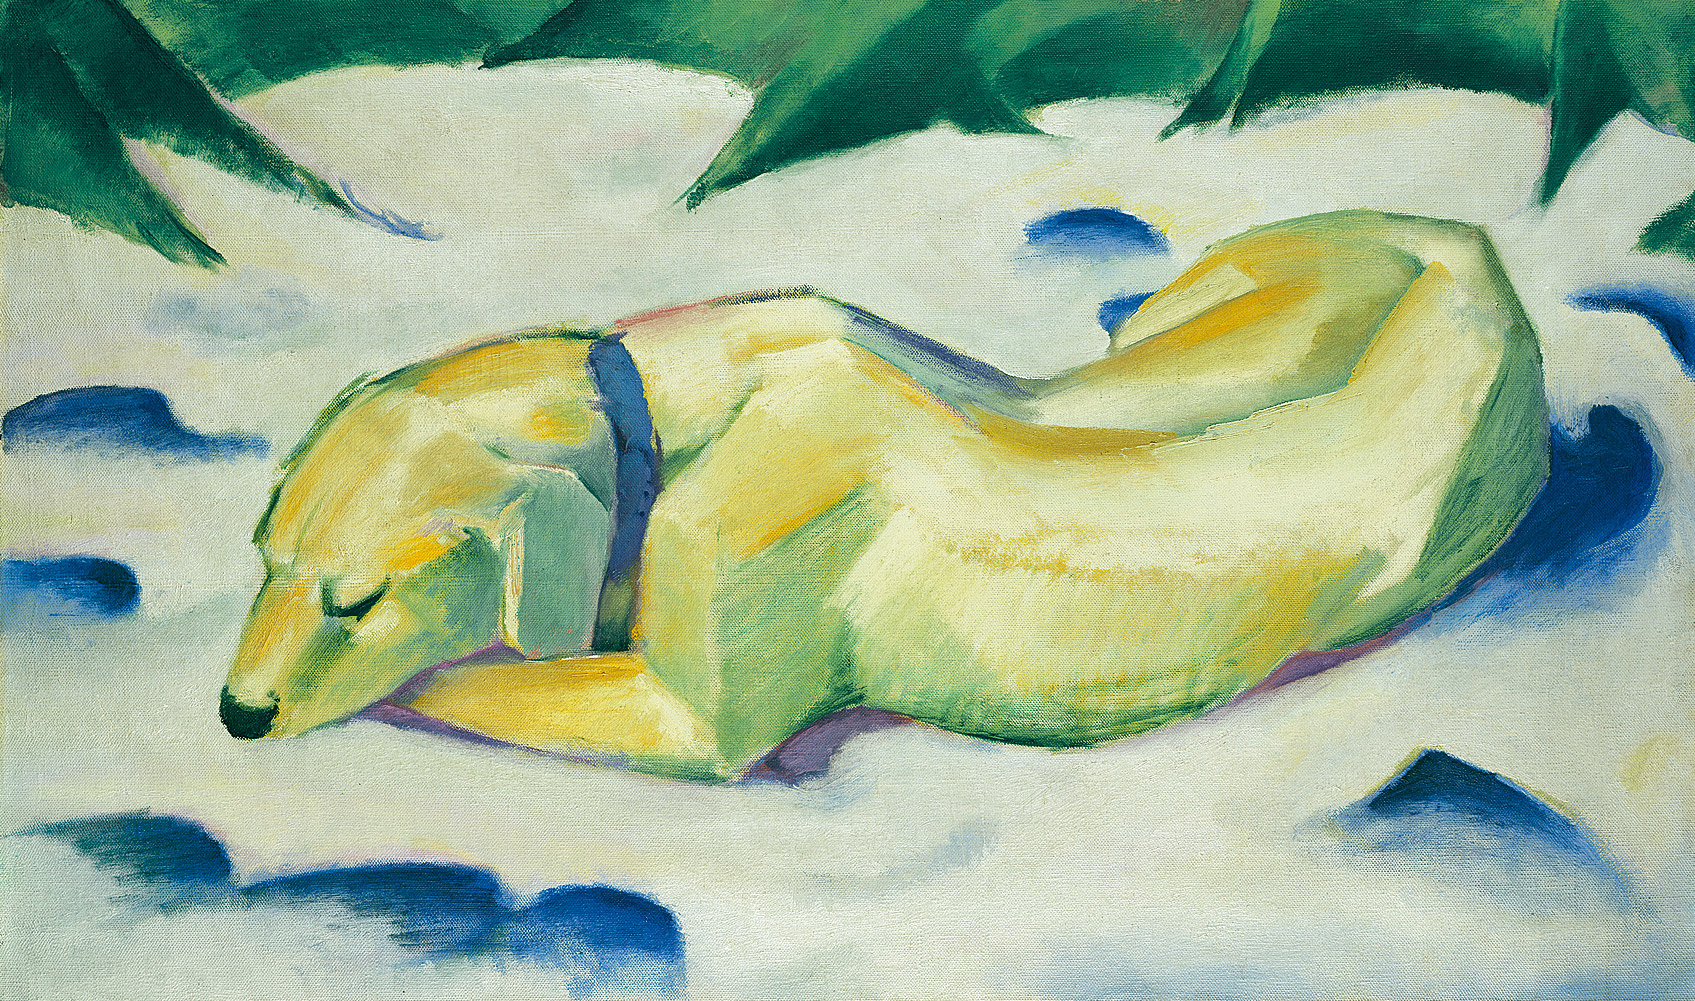 Dog Lying in the Snow by Franz Marc - ca. 1911 - 62.5 × 105 cm Städel Museum